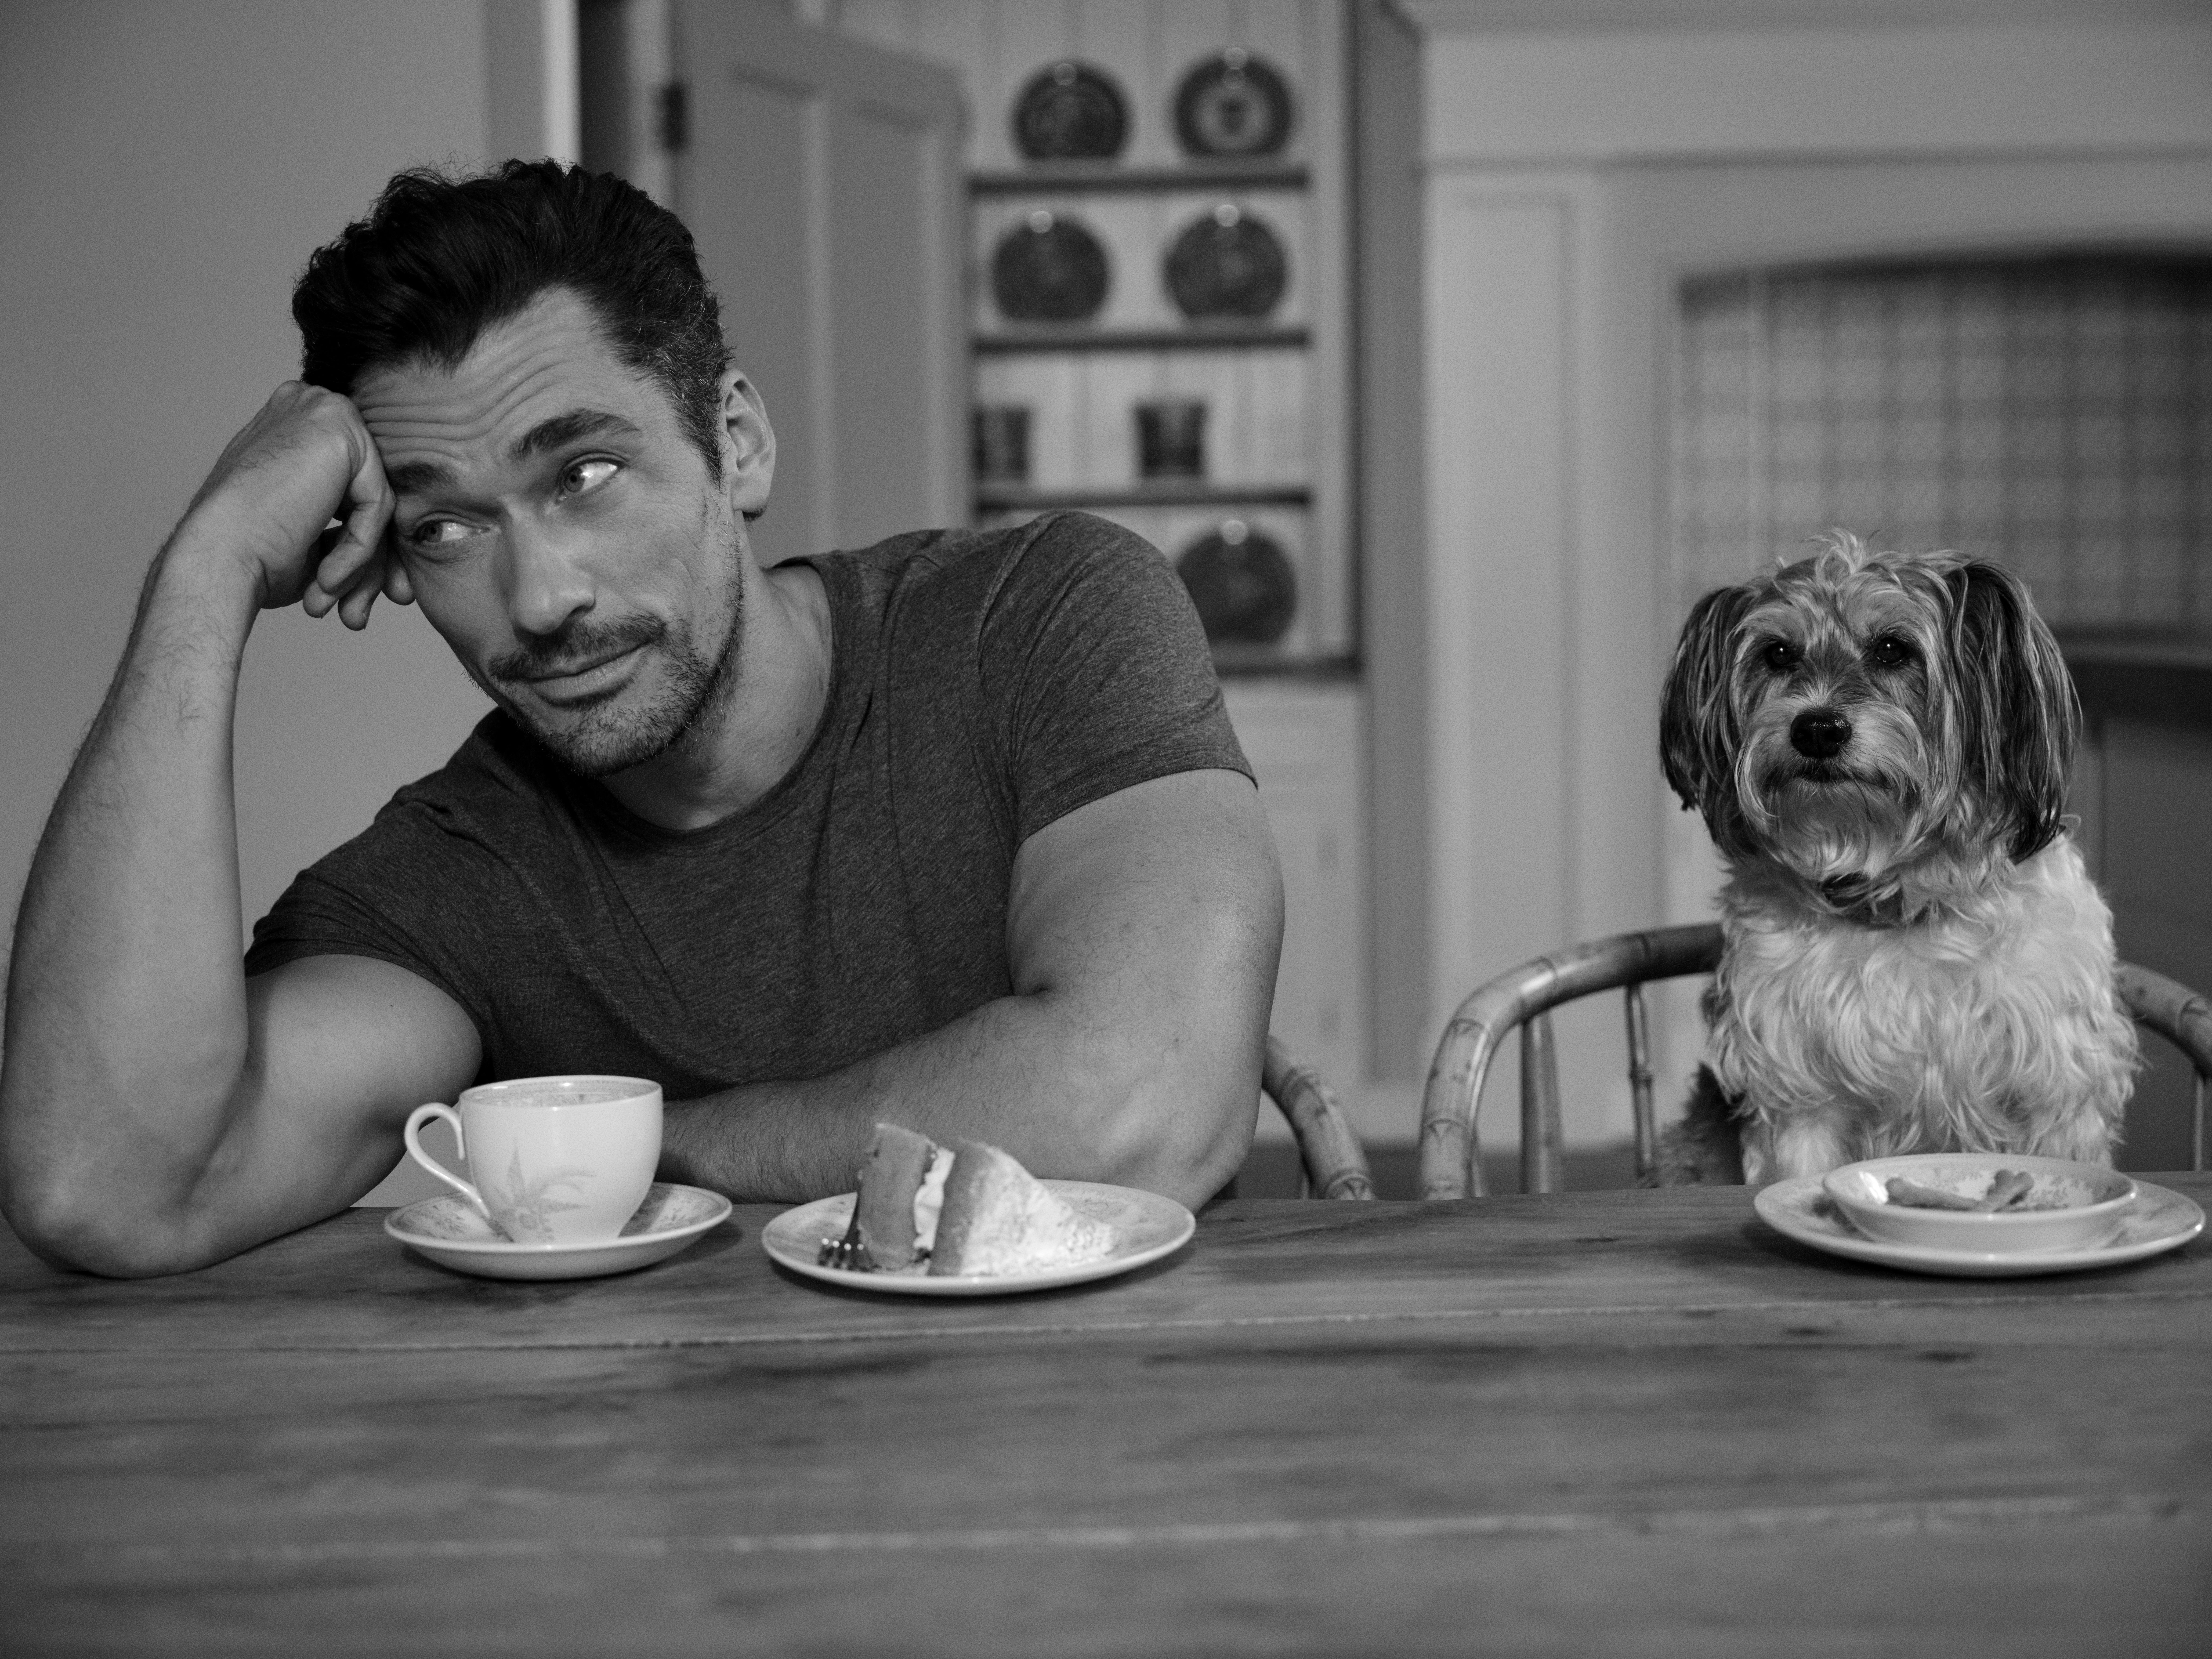 These days Gandy is equal parts family man, model and entrepreneur